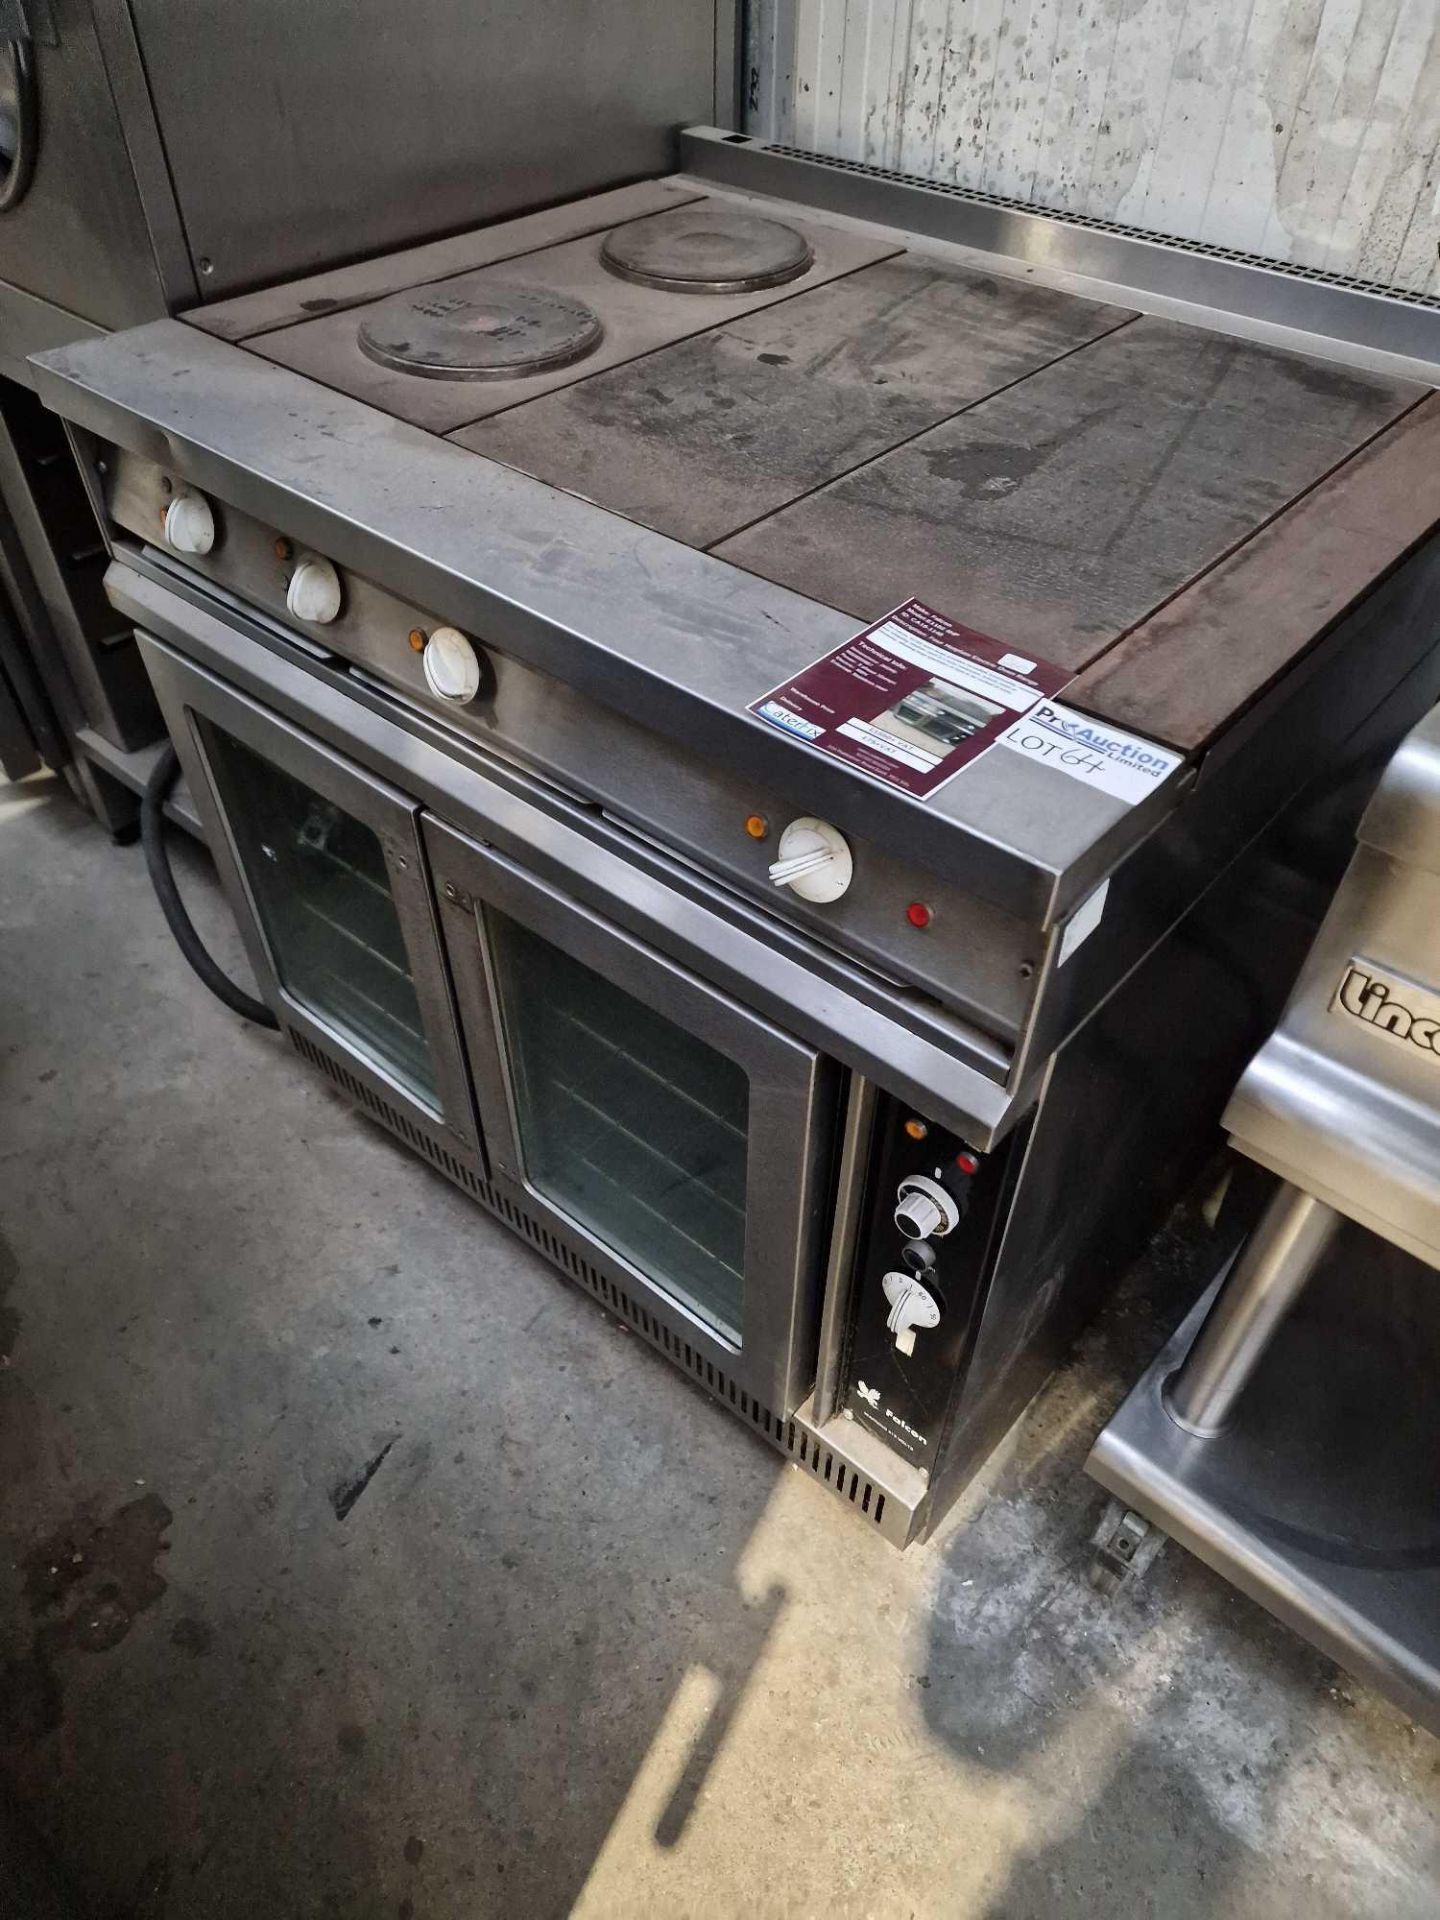 Falcon Stainless Steel Four Hotplate Electric Oven Range The Falcon E1102 oven range provides